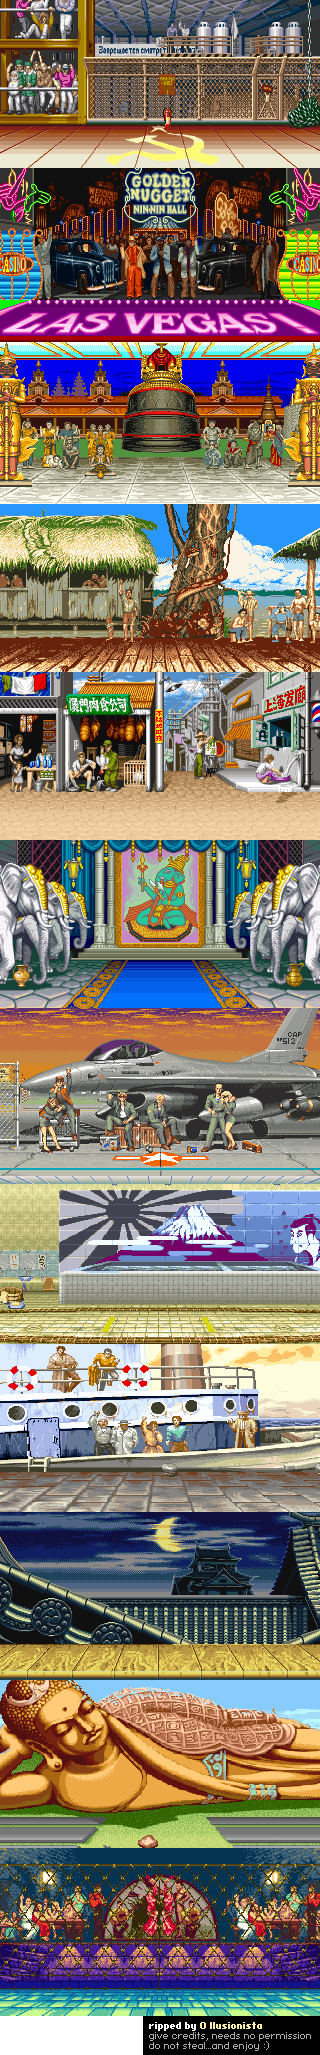 Street Fighter 2: Champion Edition - Backgrounds